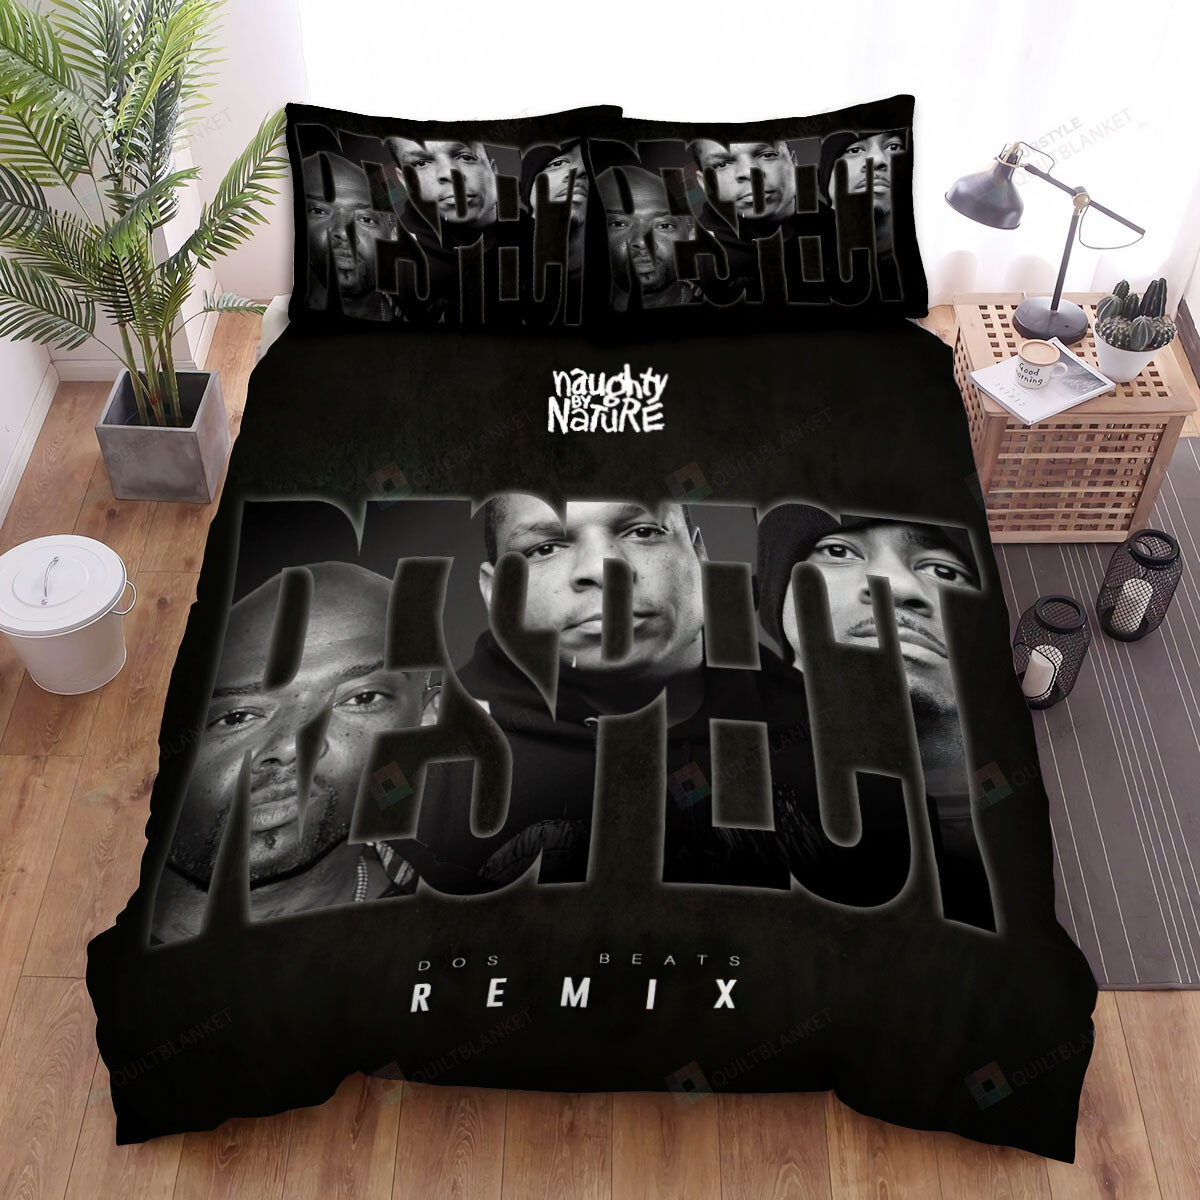 Naughty By Nature Respect Remix Bed Sheets Spread Comforter Duvet Cover Bedding Sets